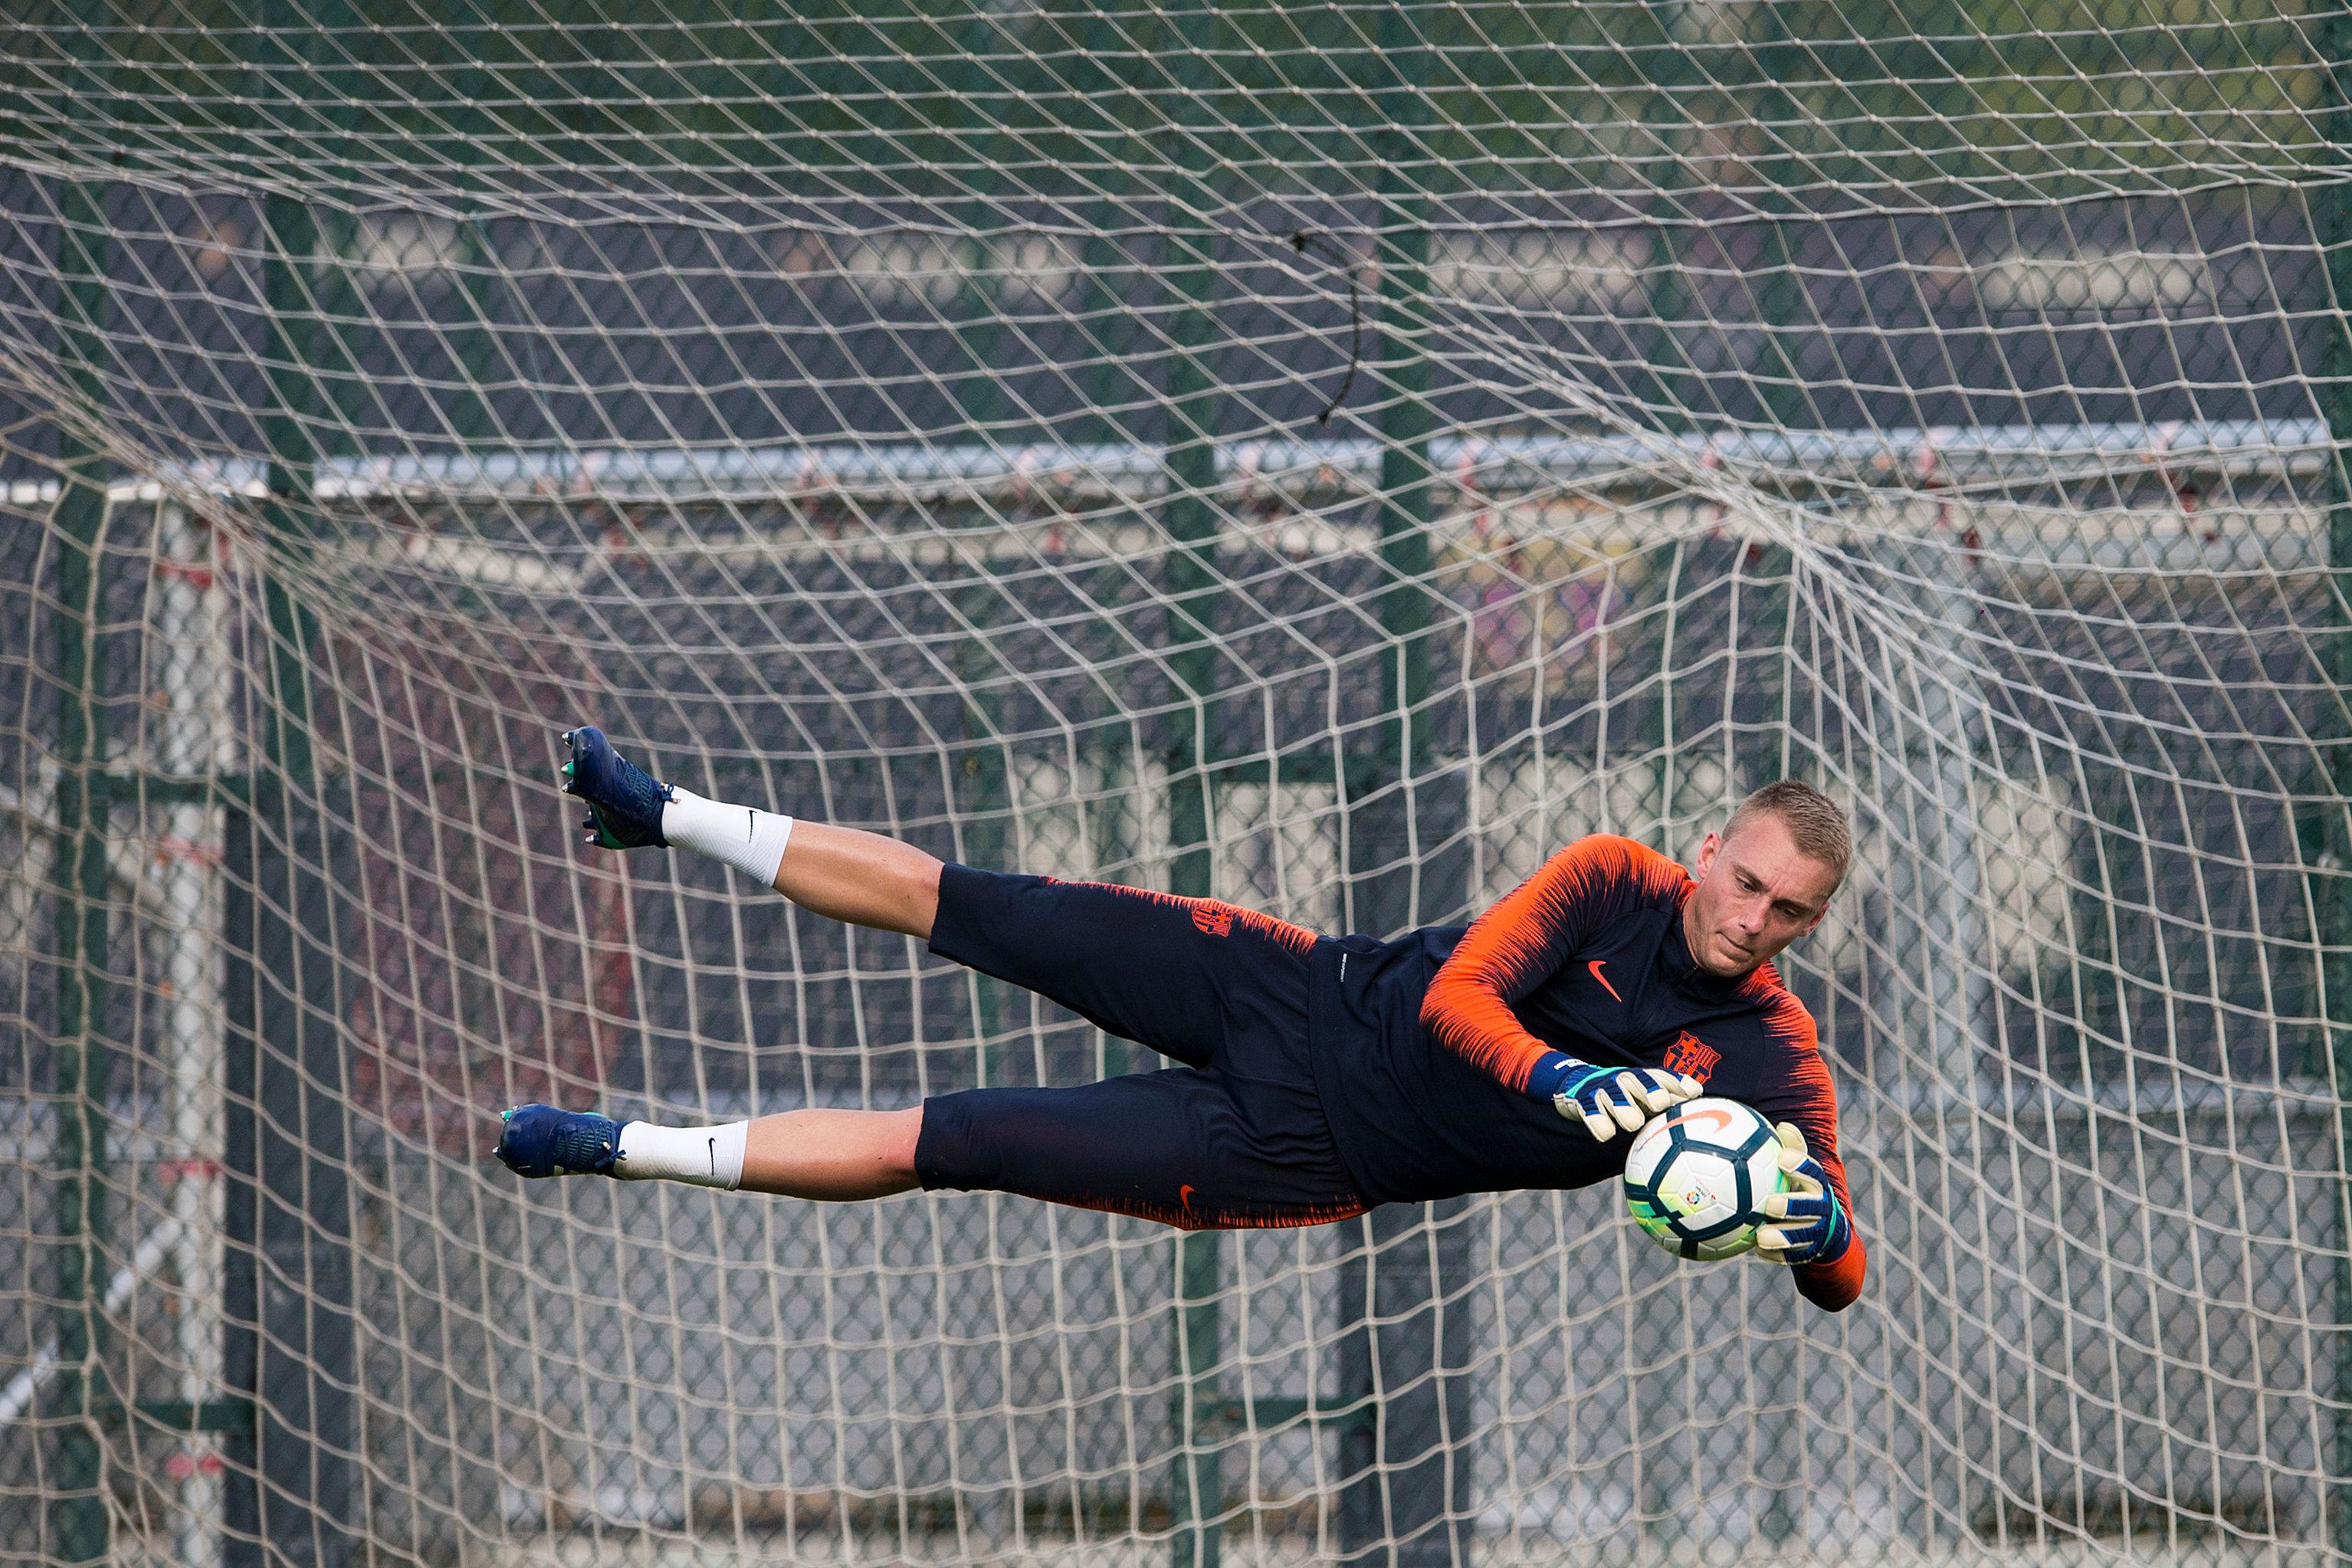 TOPSHOT - Barcelona's Dutch goalkeeper Jasper Cillessen takes part in a training session at the Barcelona Joan Gamper sports centre in Sant Joan Despi near Barcelona on May 5, 2018 on the eve of the Spanish league football match FC Barcelona vs Real Madrid. (Photo by Josep LAGO / AFP)        (Photo credit should read JOSEP LAGO/AFP/Getty Images)